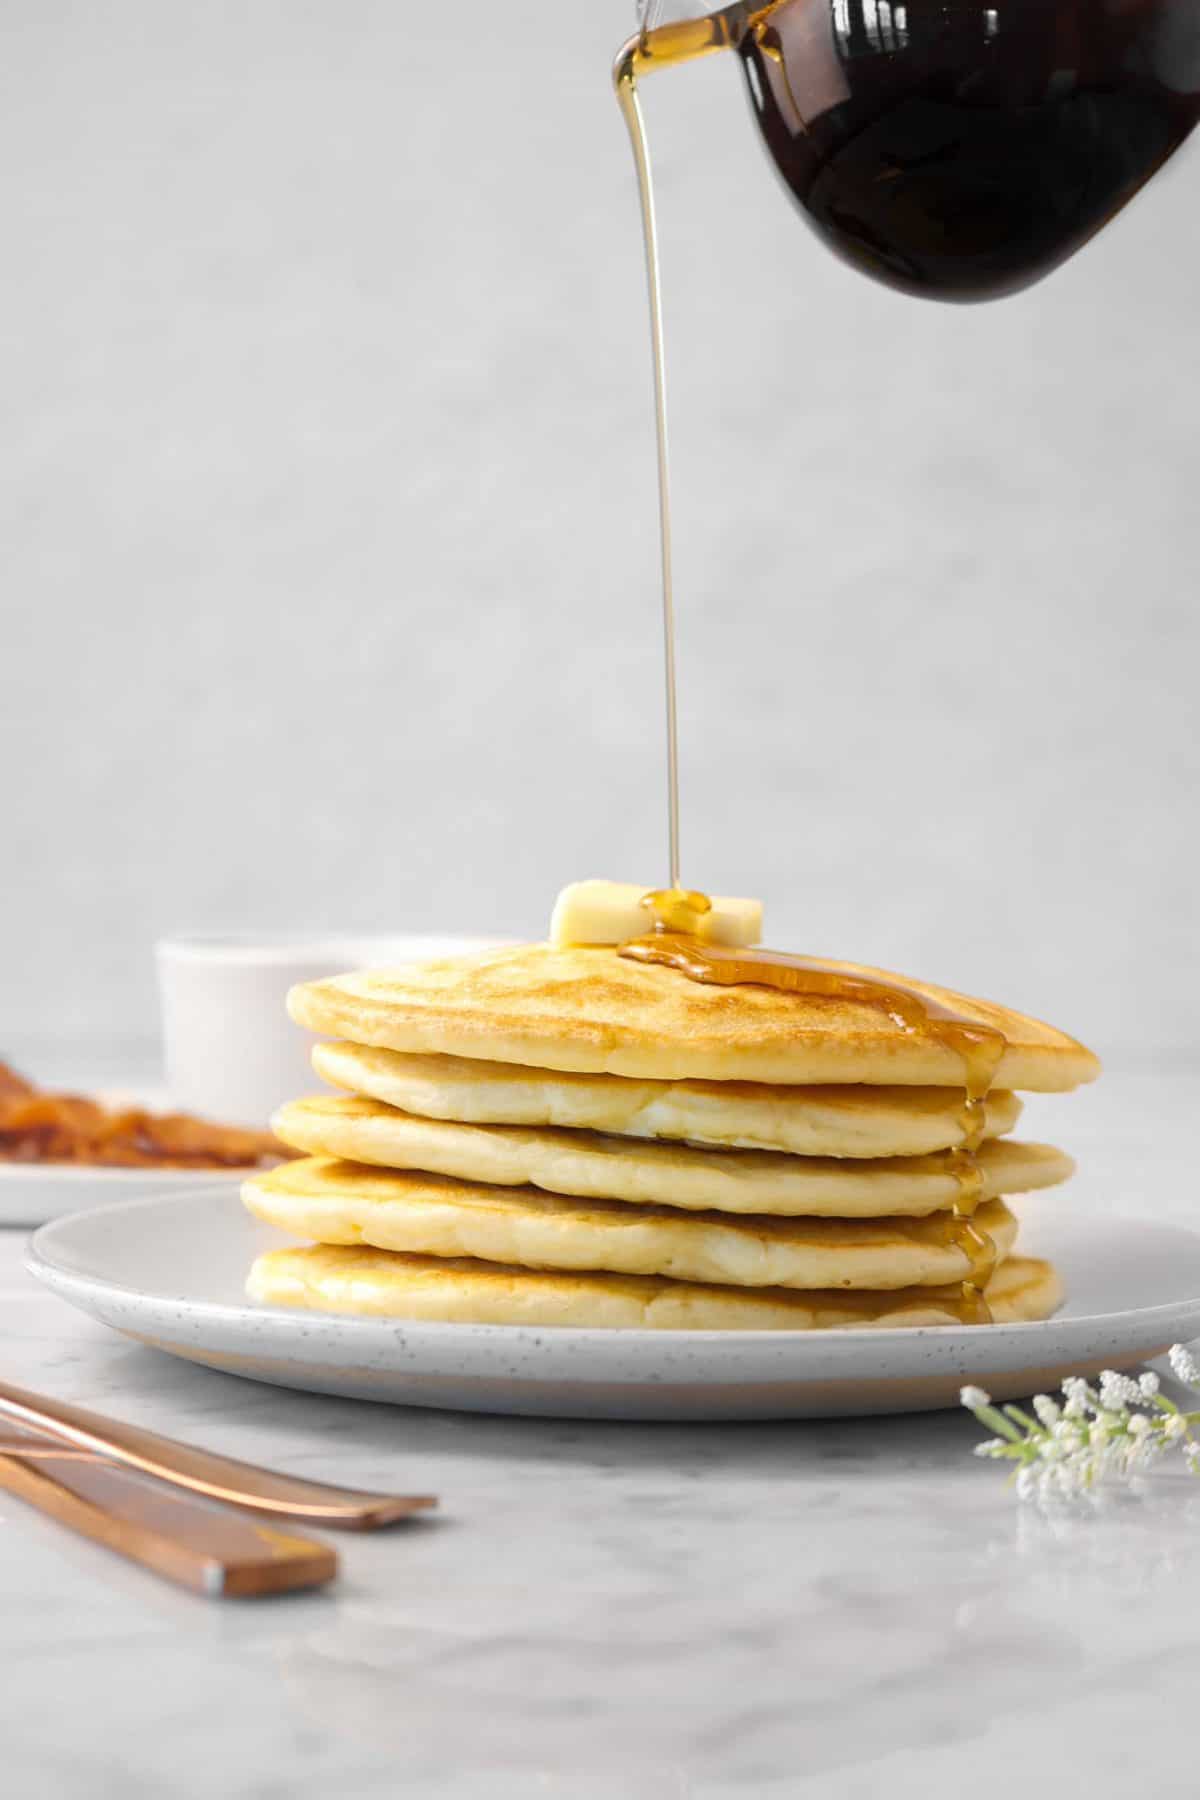 maple syrup being poured on a stack of five sourdough pancakes on a white plate 